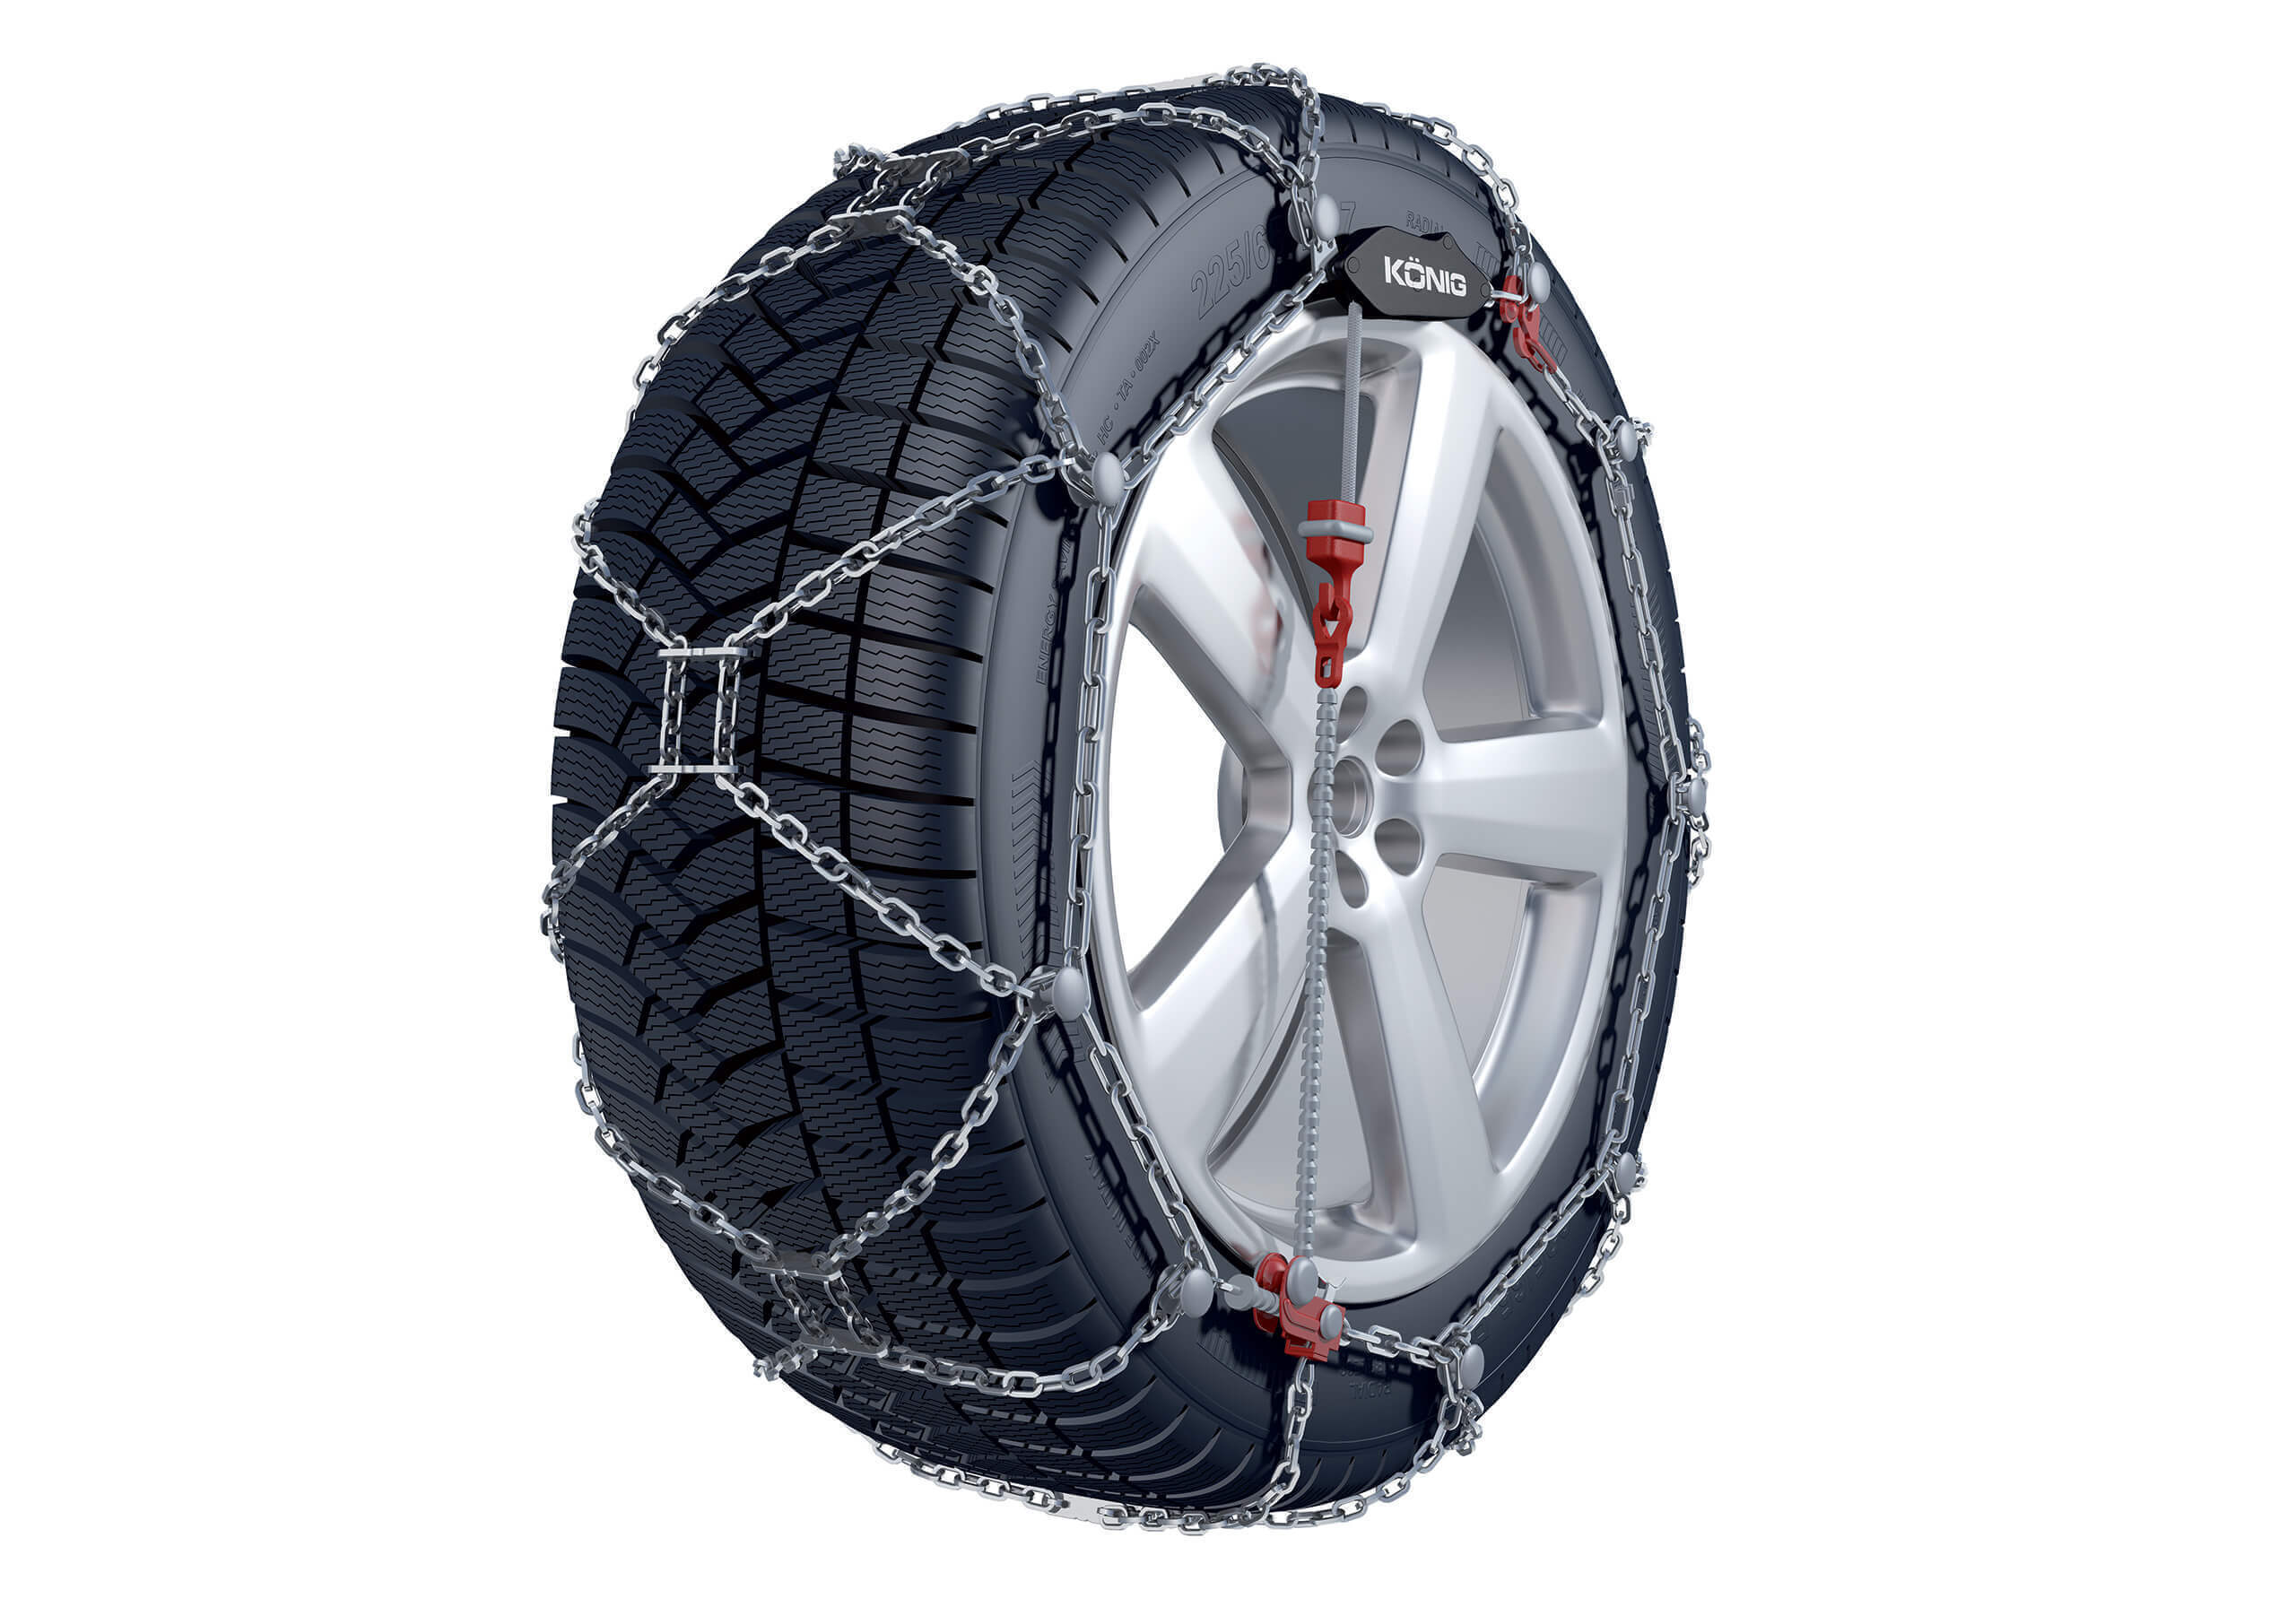 Iveco Daily L4 H2 (2006 to 2014):Knig XG-12 Pro snow chains (pair) no. KGXG-12 Pro 220